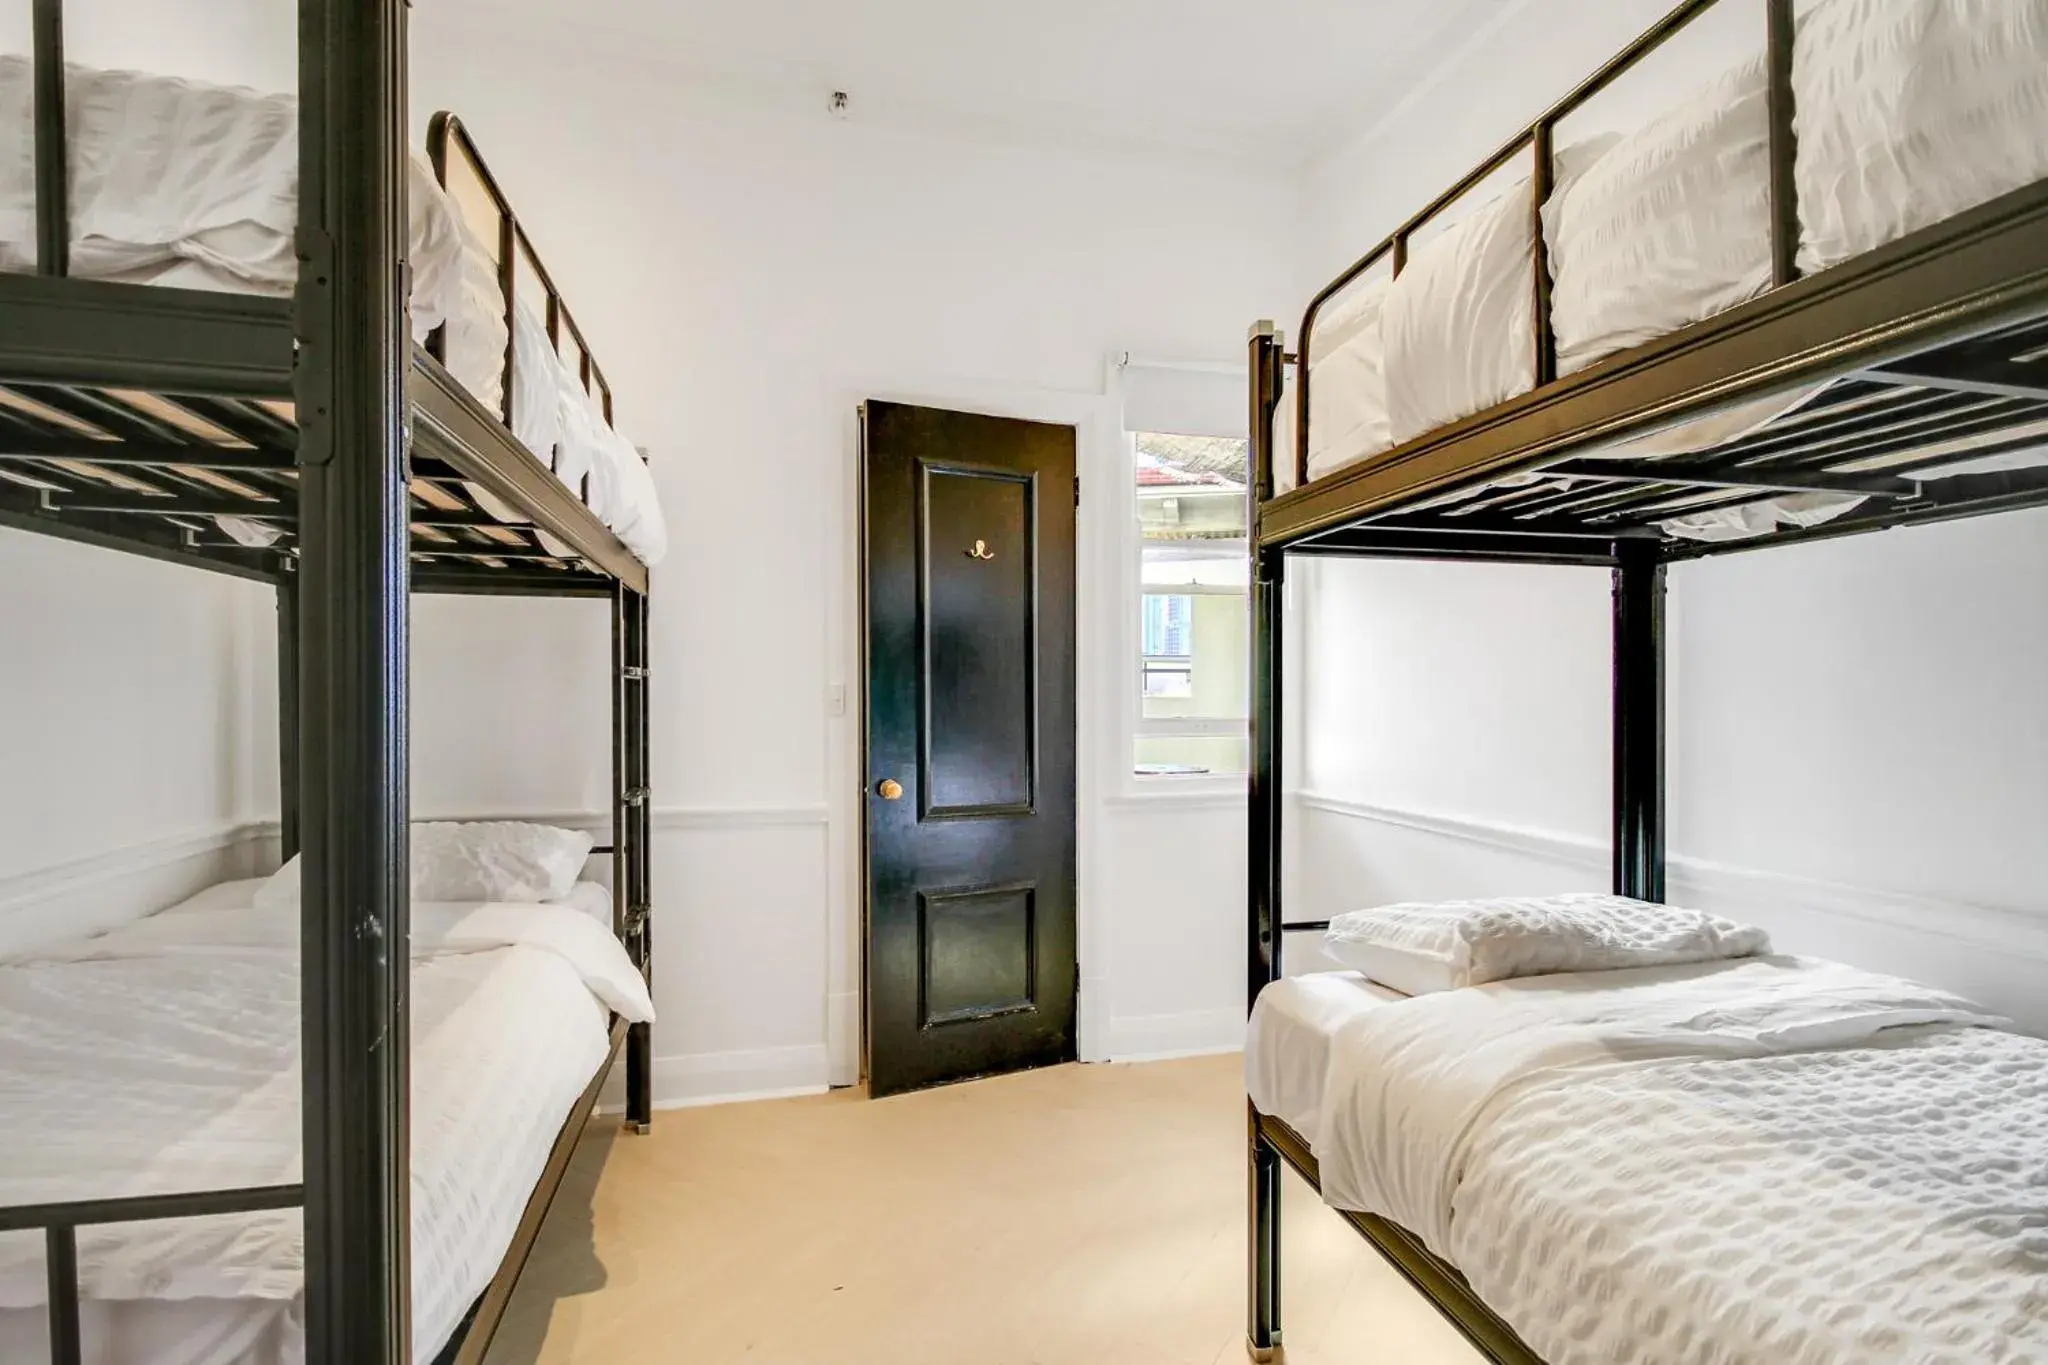 Bed, Bunk Bed in Darling Harbour Boutique Hotel